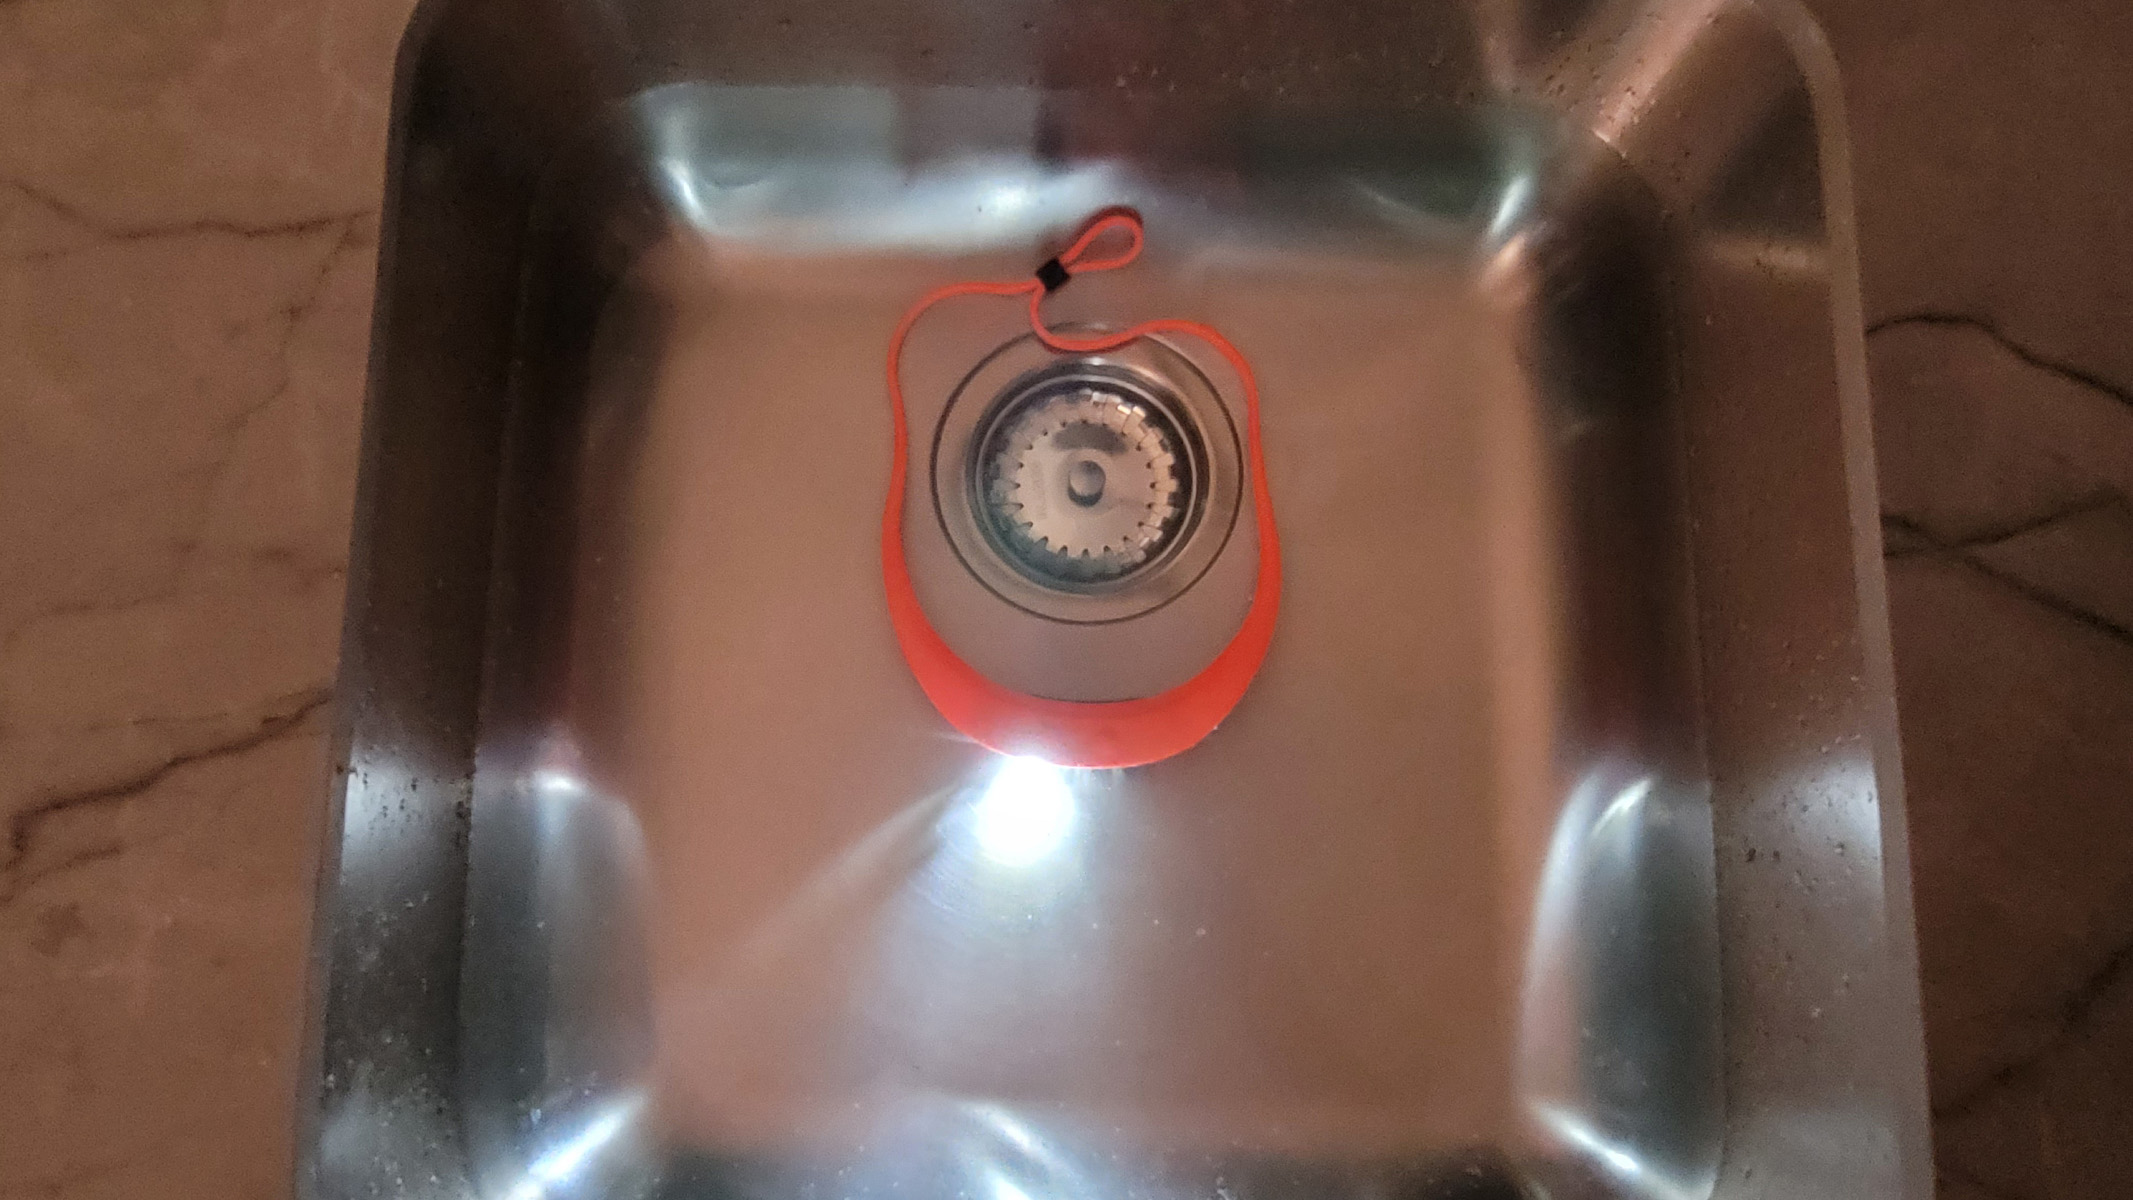 The Knog Bilby 400 submerged under water in a sink with the lamp on to demonstrate the IP67 rating